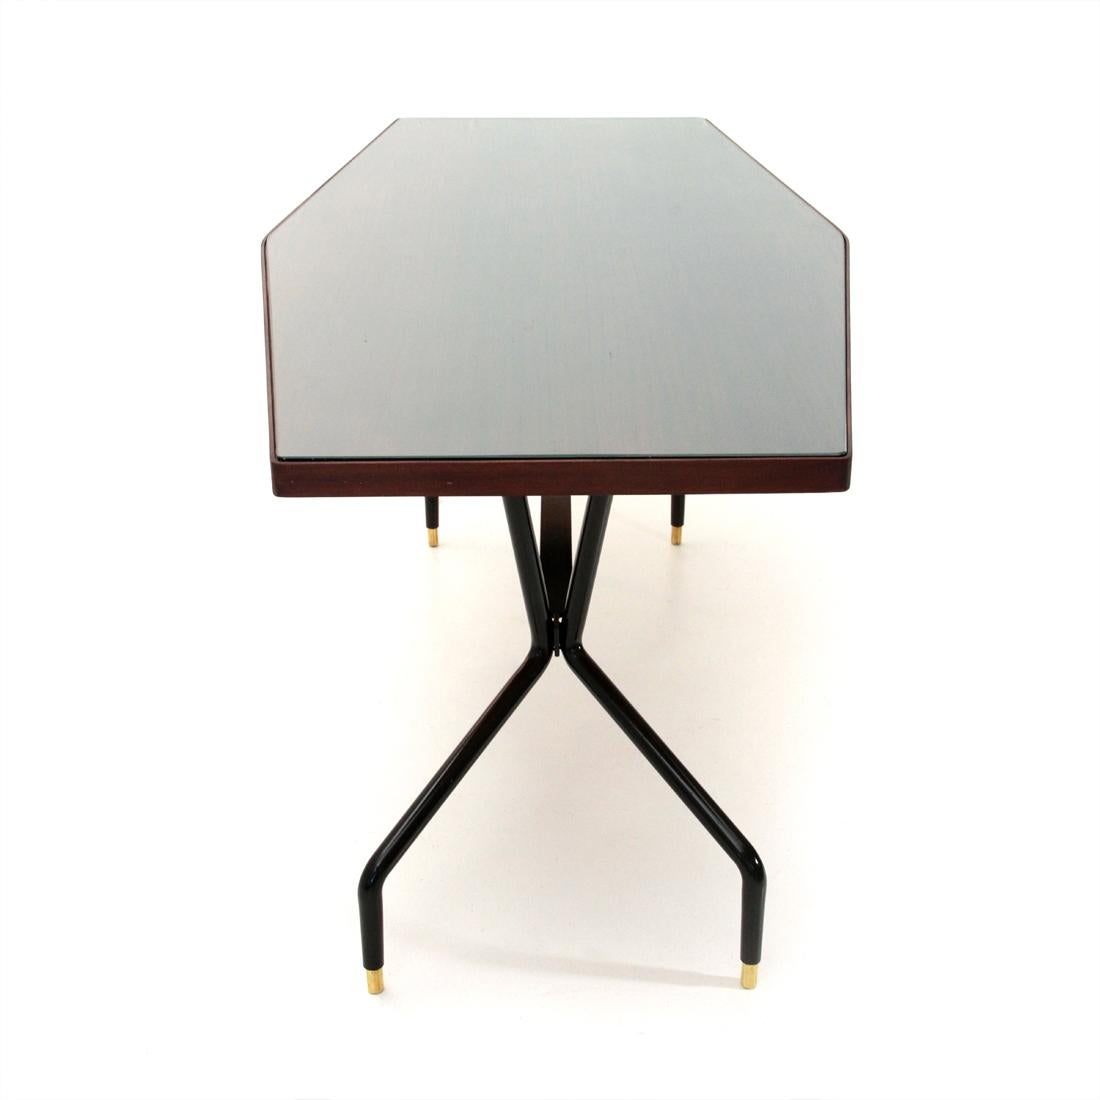 Italian manufacturing table produced in the 1950s.
Top in teak veneered wood and glass, teak edge.
Black painted metal structure, with brass feet.
Good general conditions, some signs due to normal use over time, veneer raised in some